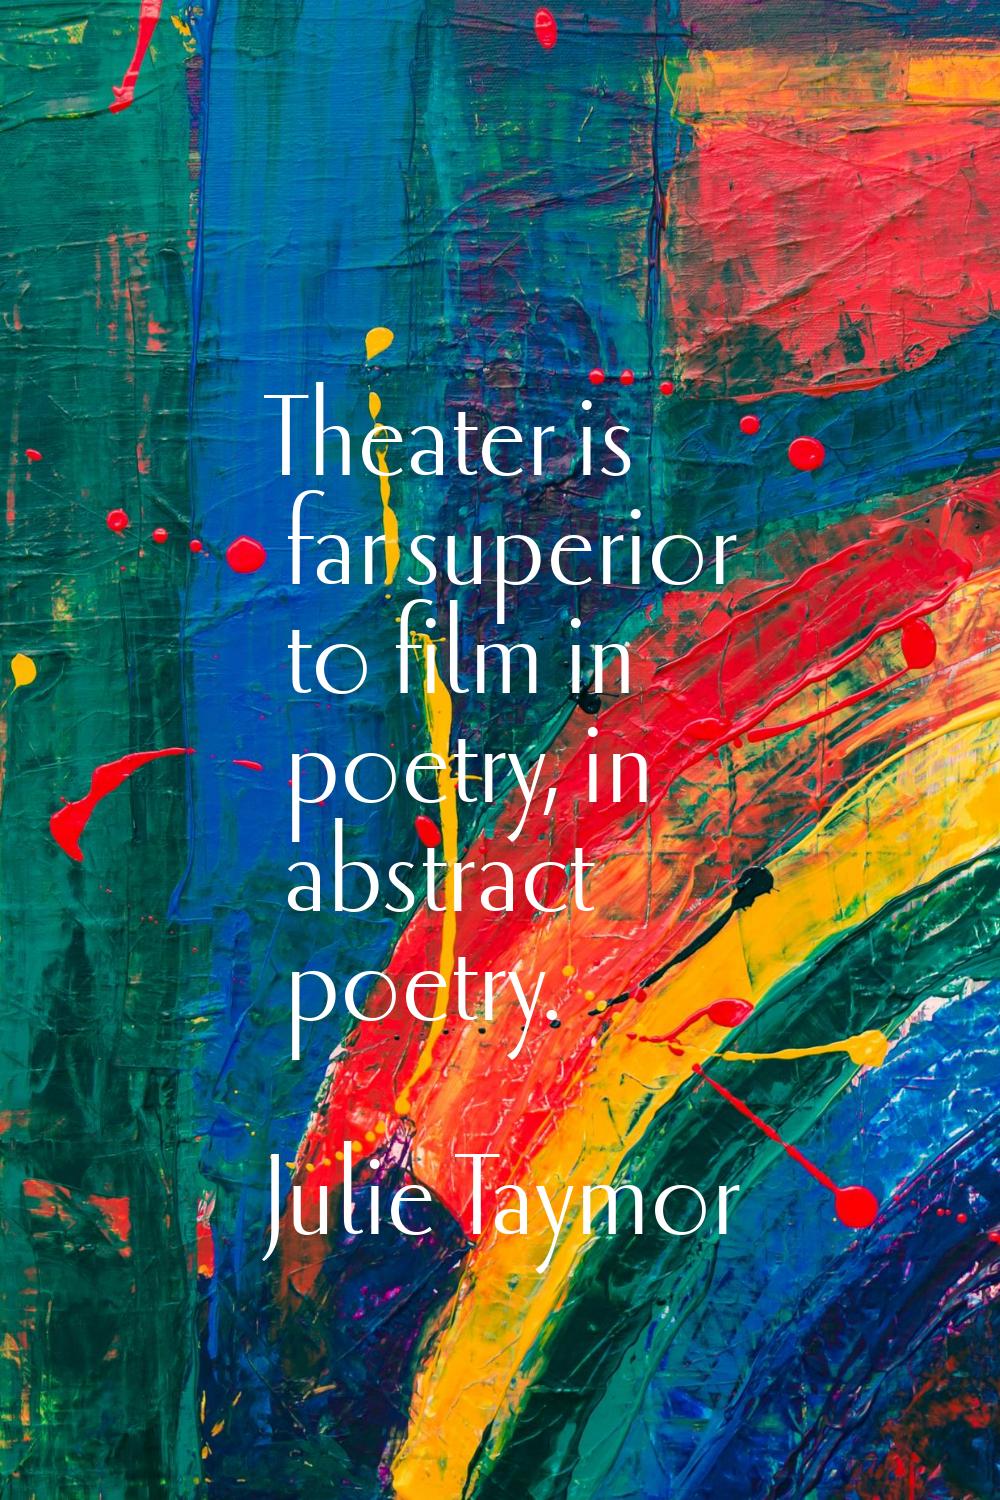 Theater is far superior to film in poetry, in abstract poetry.